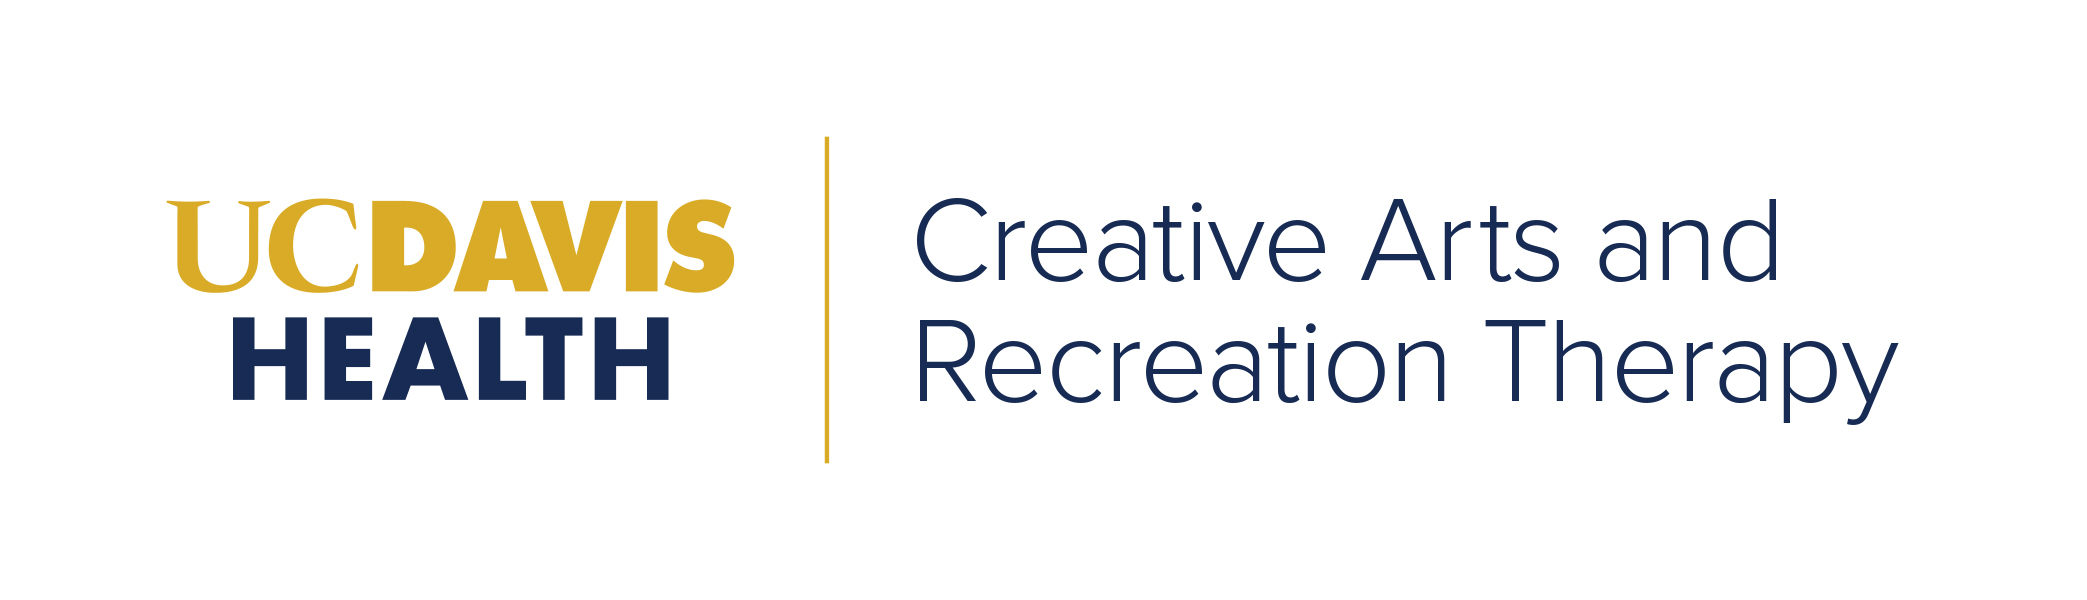 Creative-Arts-and-Recreation-Therapy